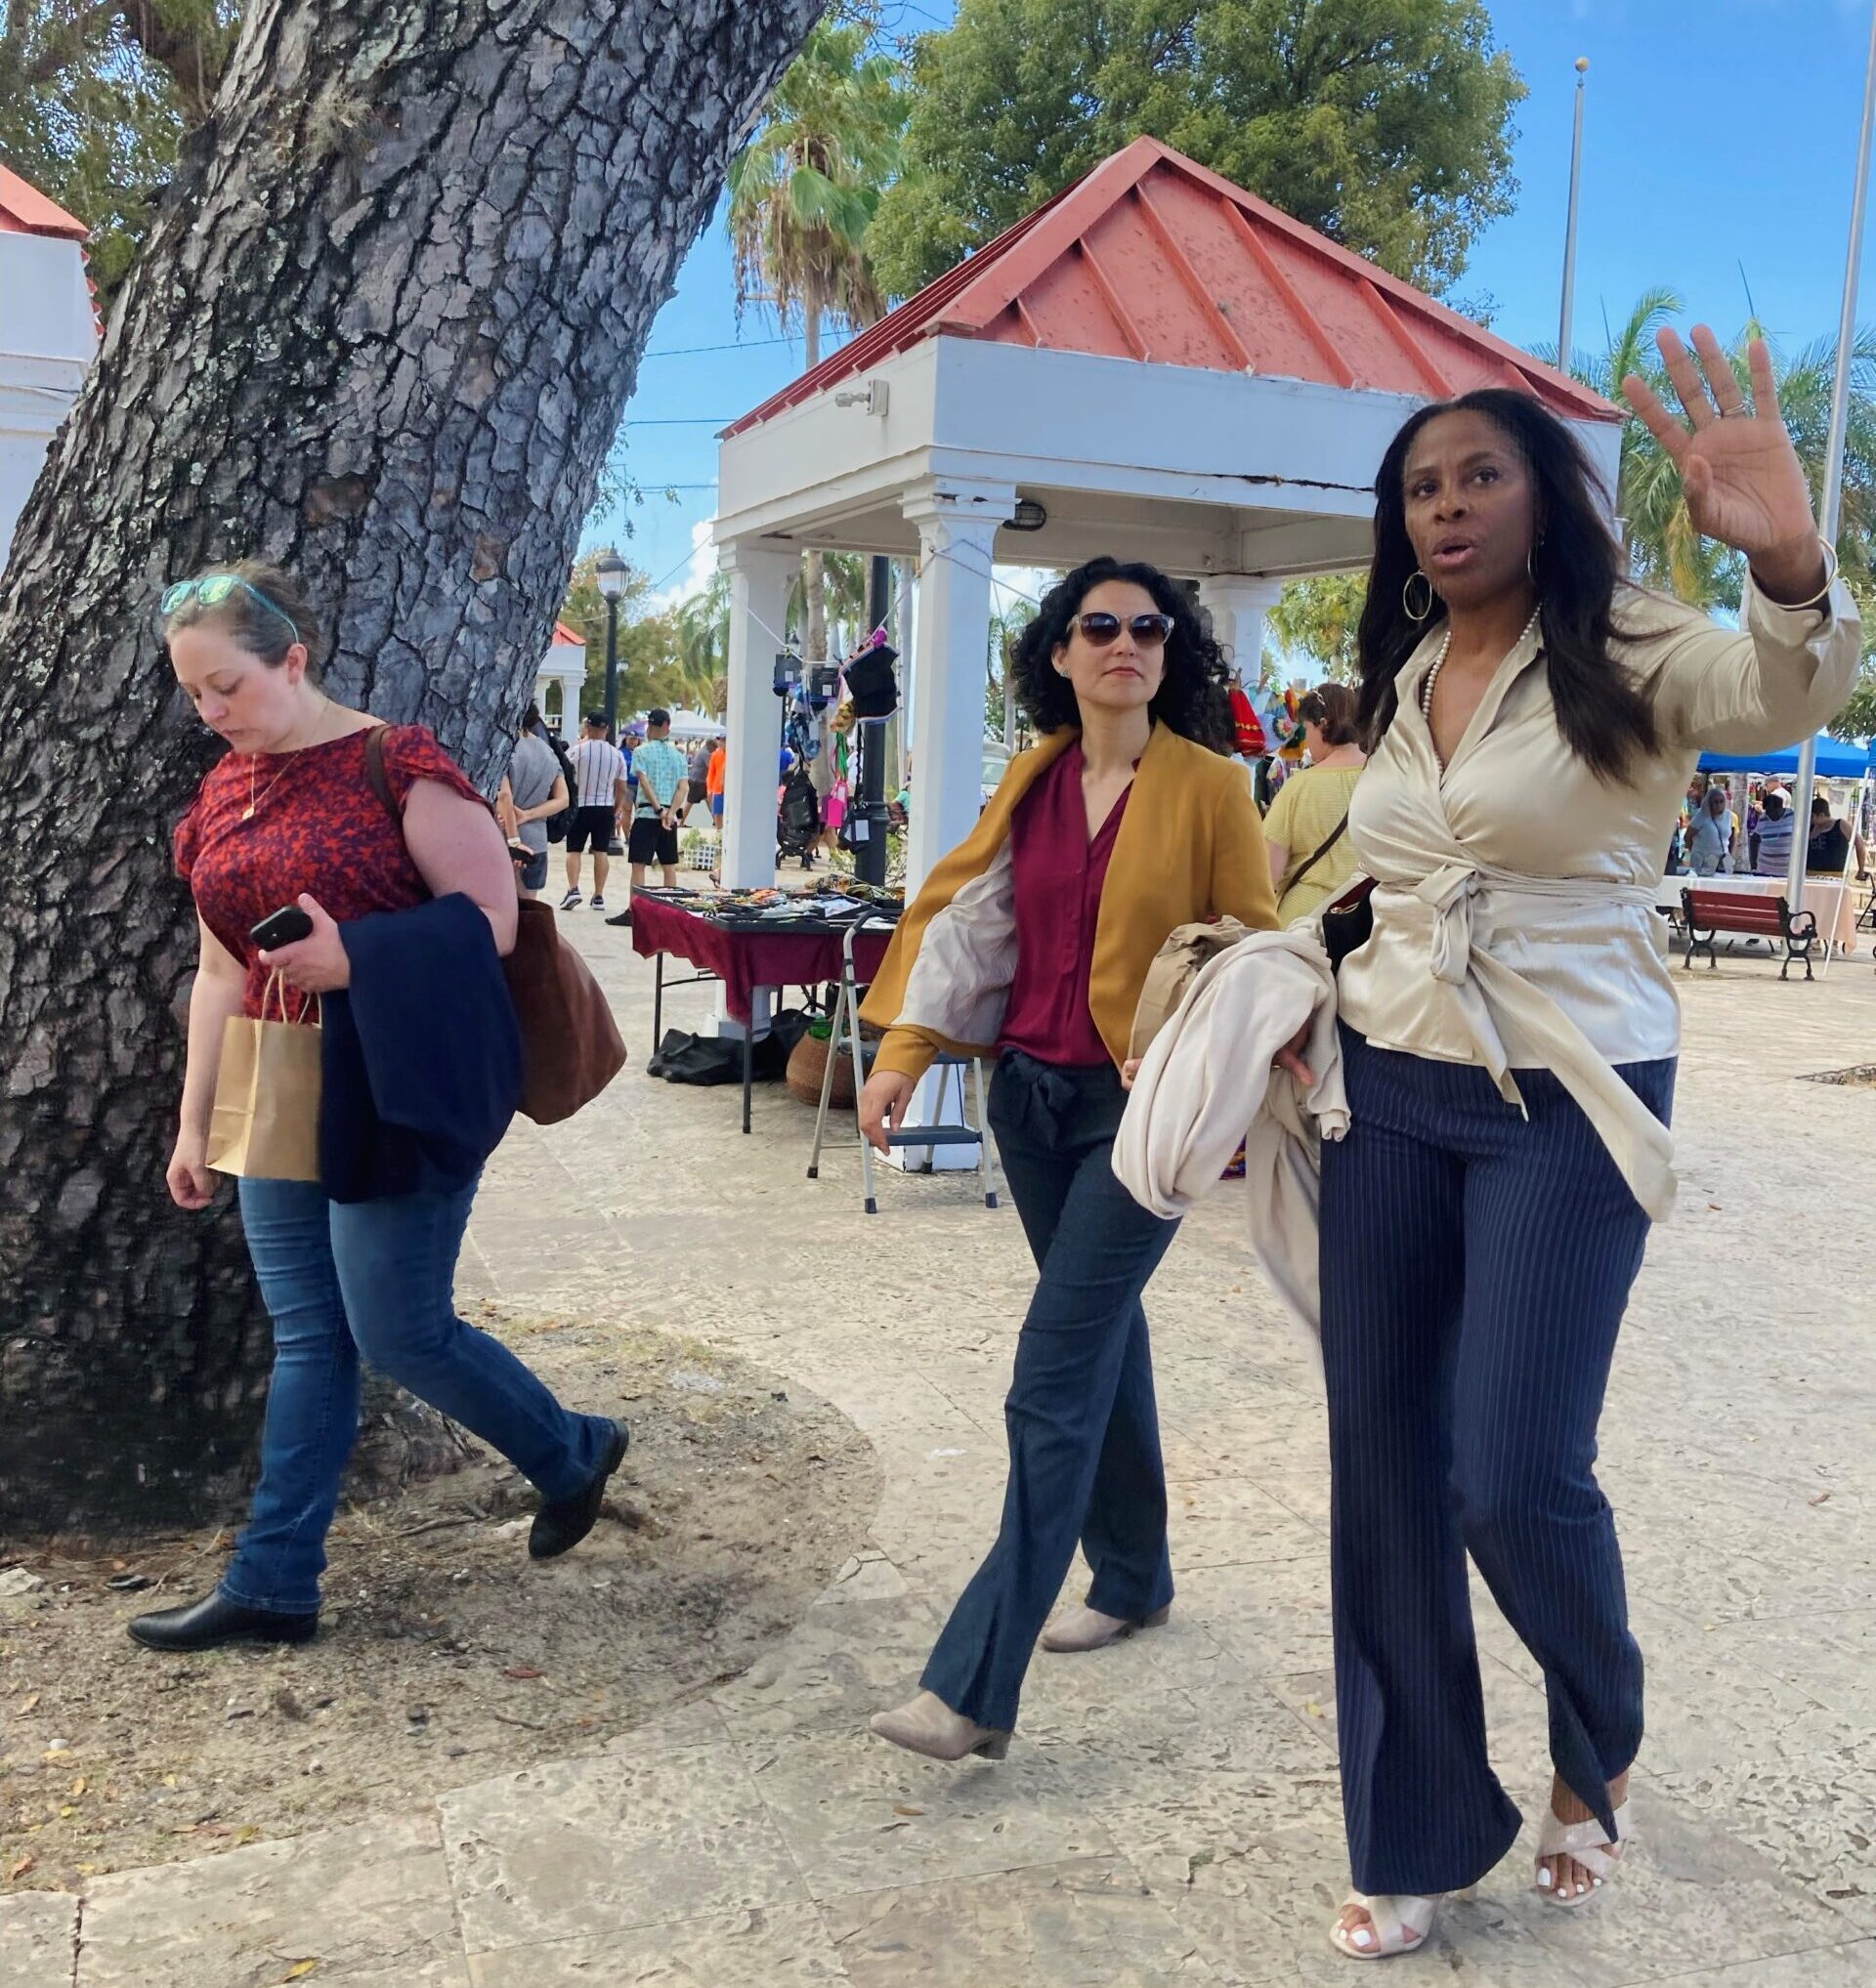 USDA Rural Development Under Secretary Xochitl Torres Small tours St. Croix on Tuesday with V.I. Delegate to Congress Stacey Plaskett. (Submitted photo)